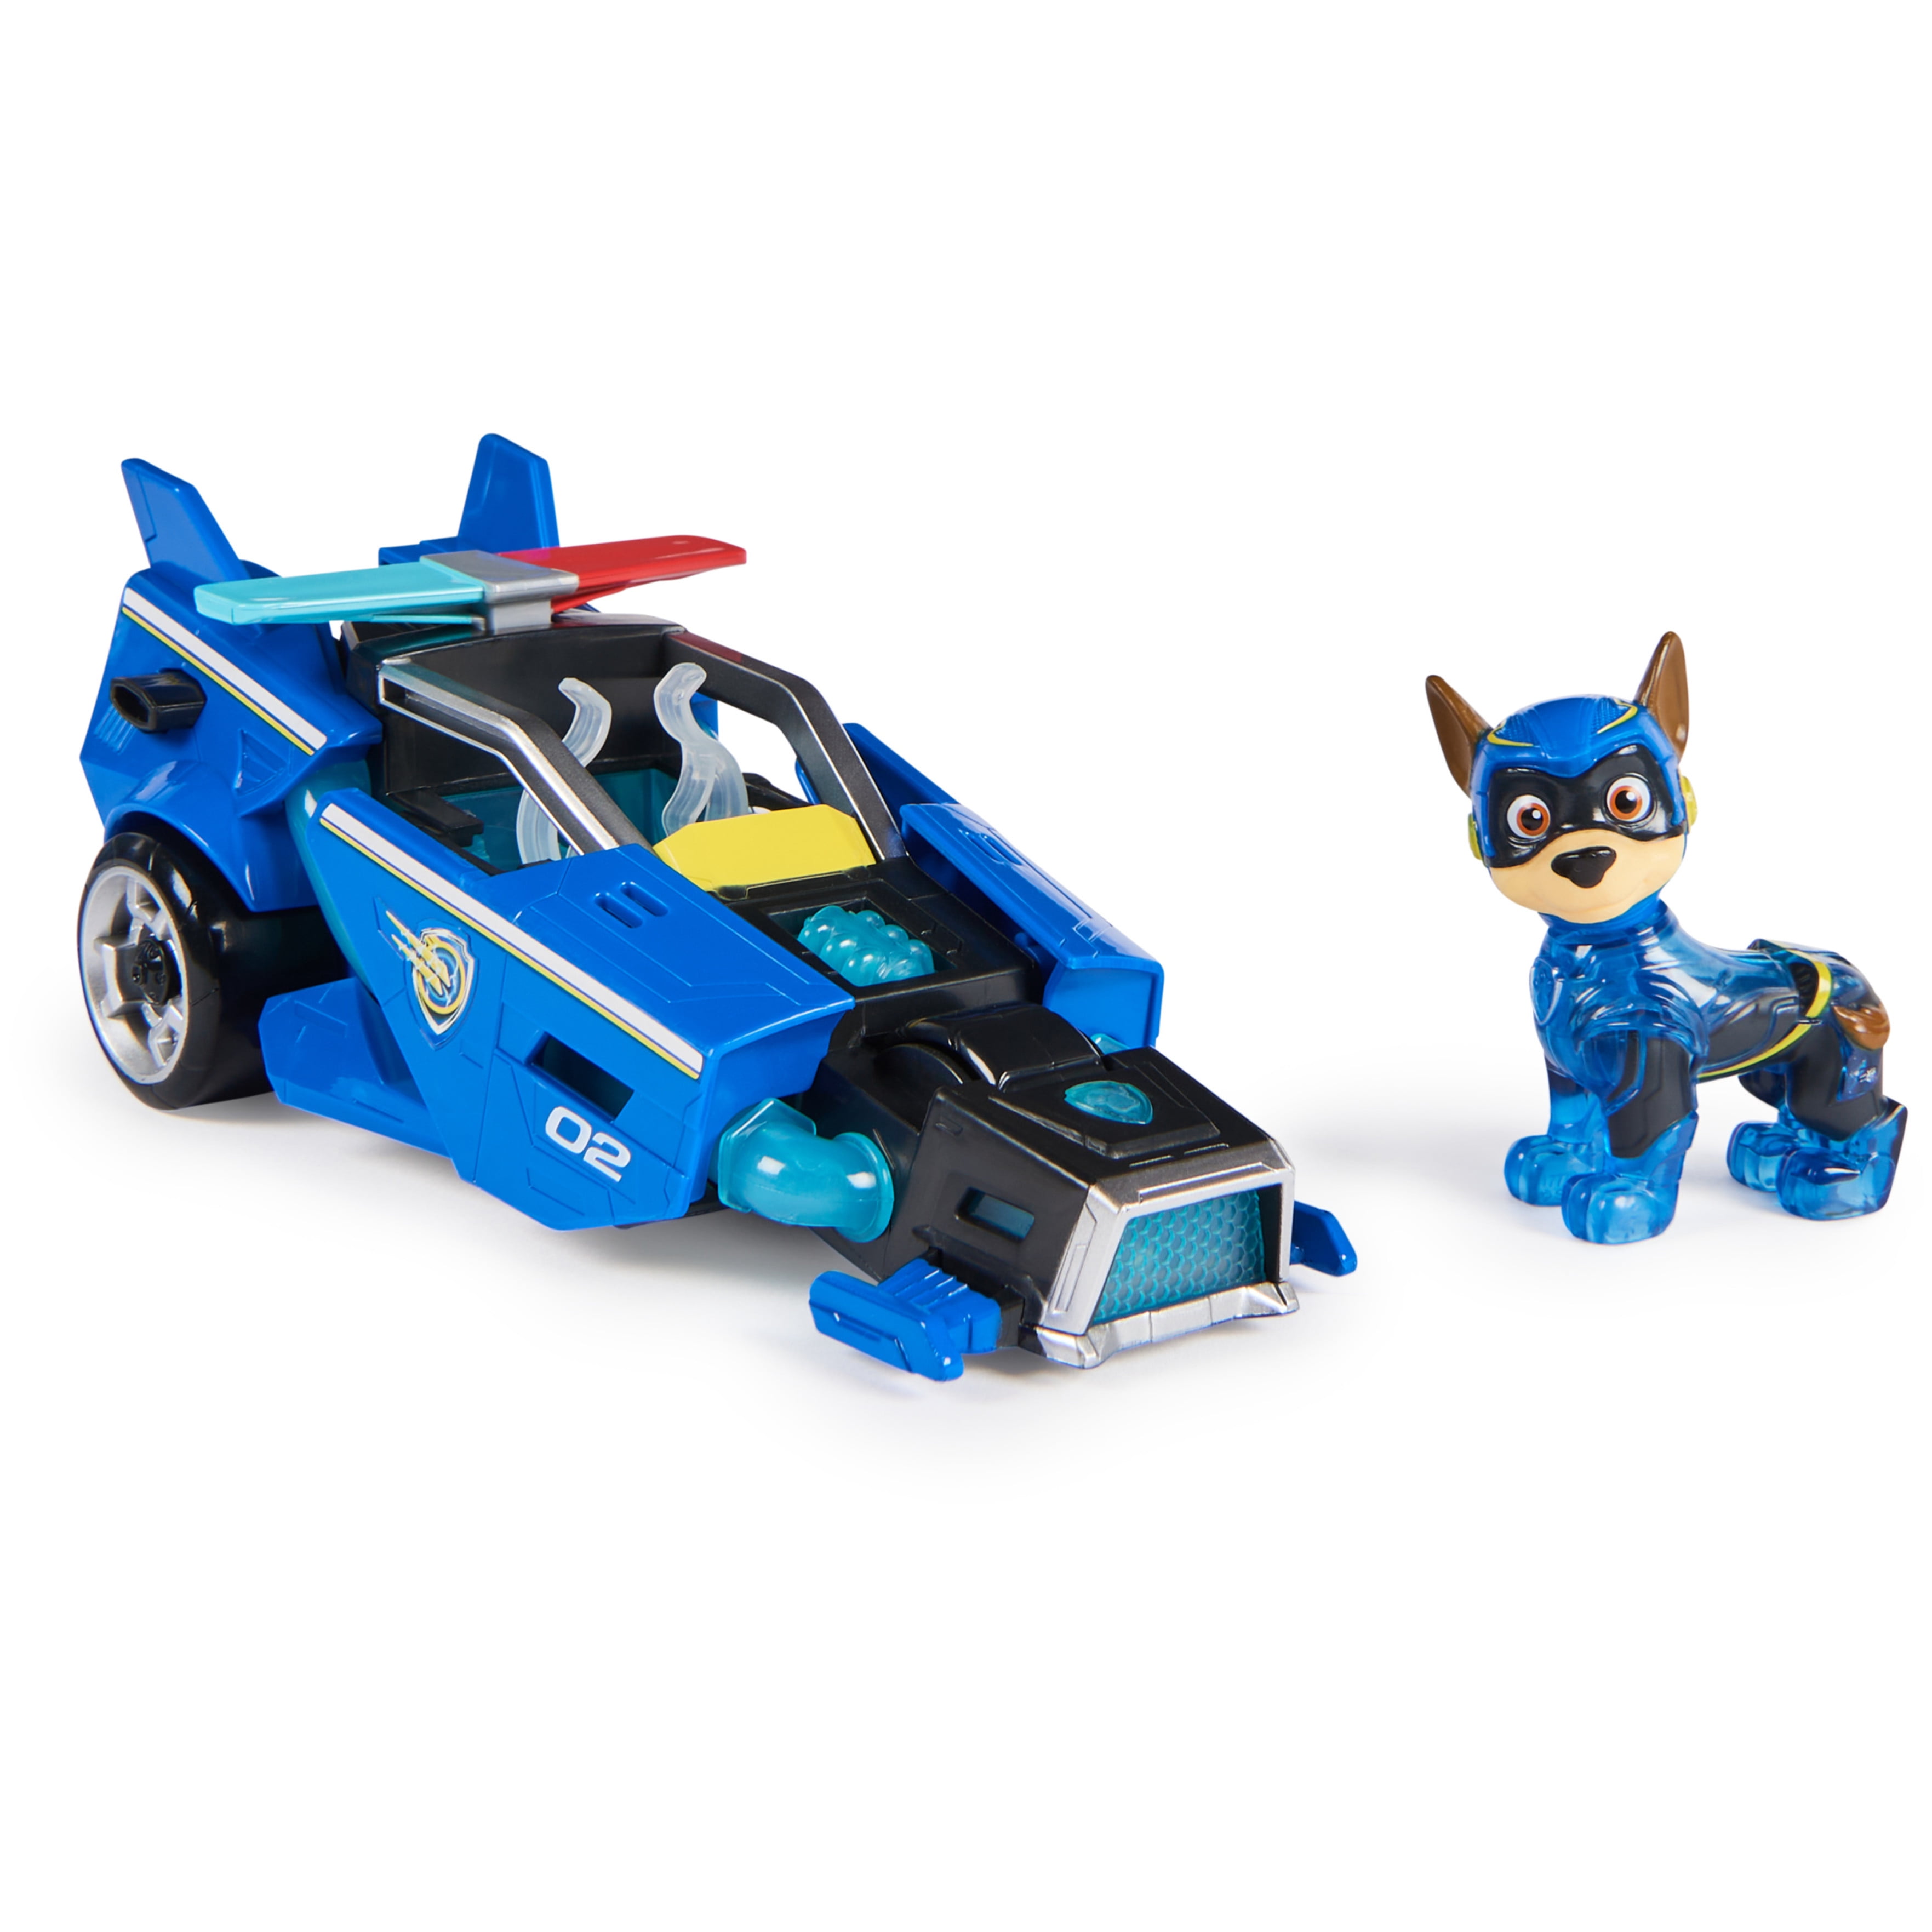 Paw Patrol The Mighty Movie Toy Car with Chase